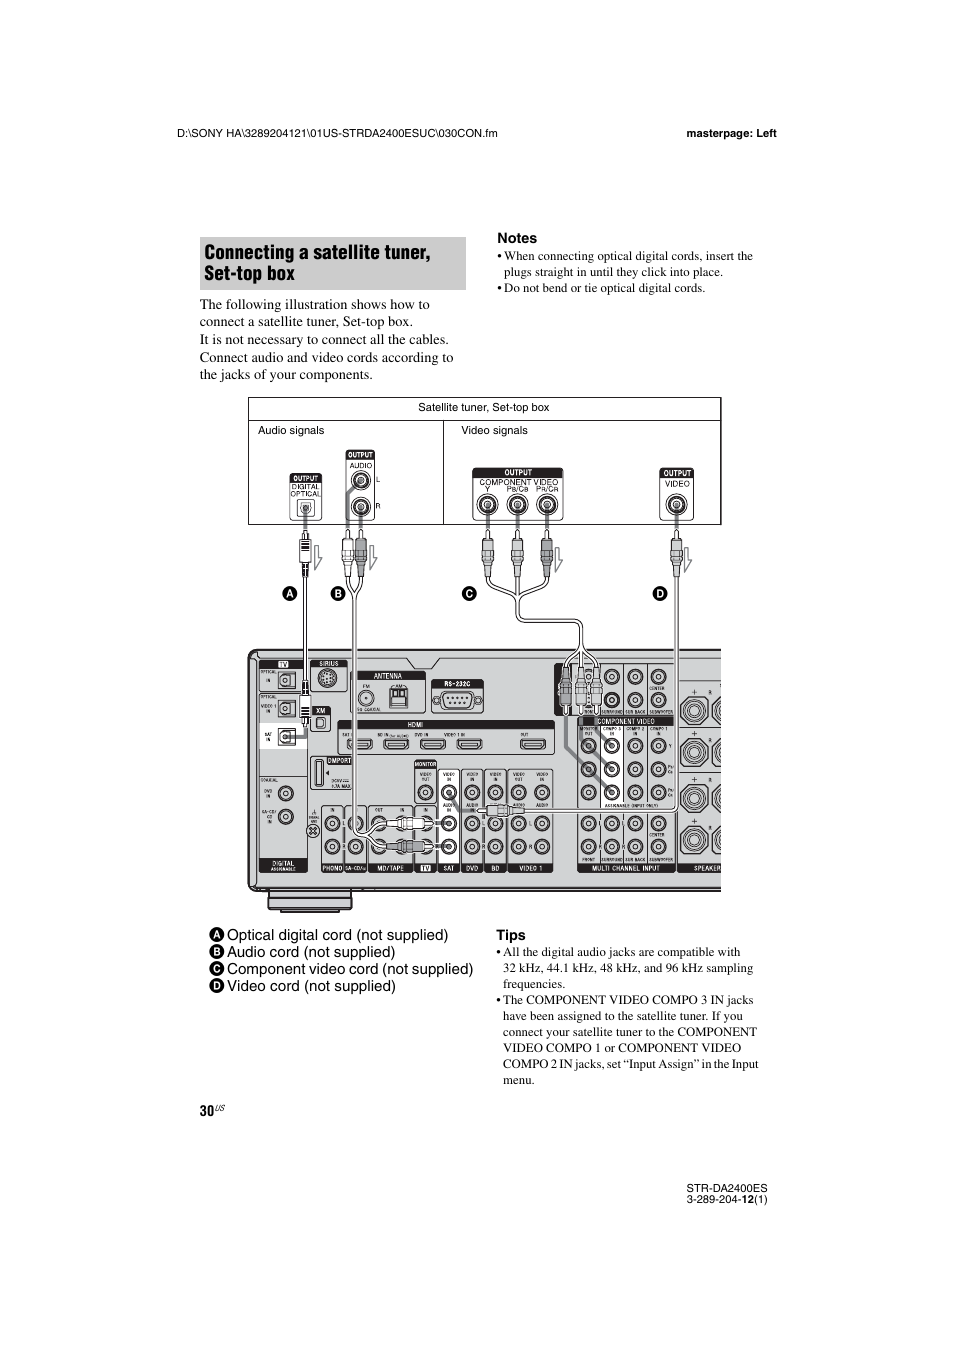 Connecting a satellite tuner, set-top box | Sony 3-289-204-12(1) User Manual | Page 30 / 140